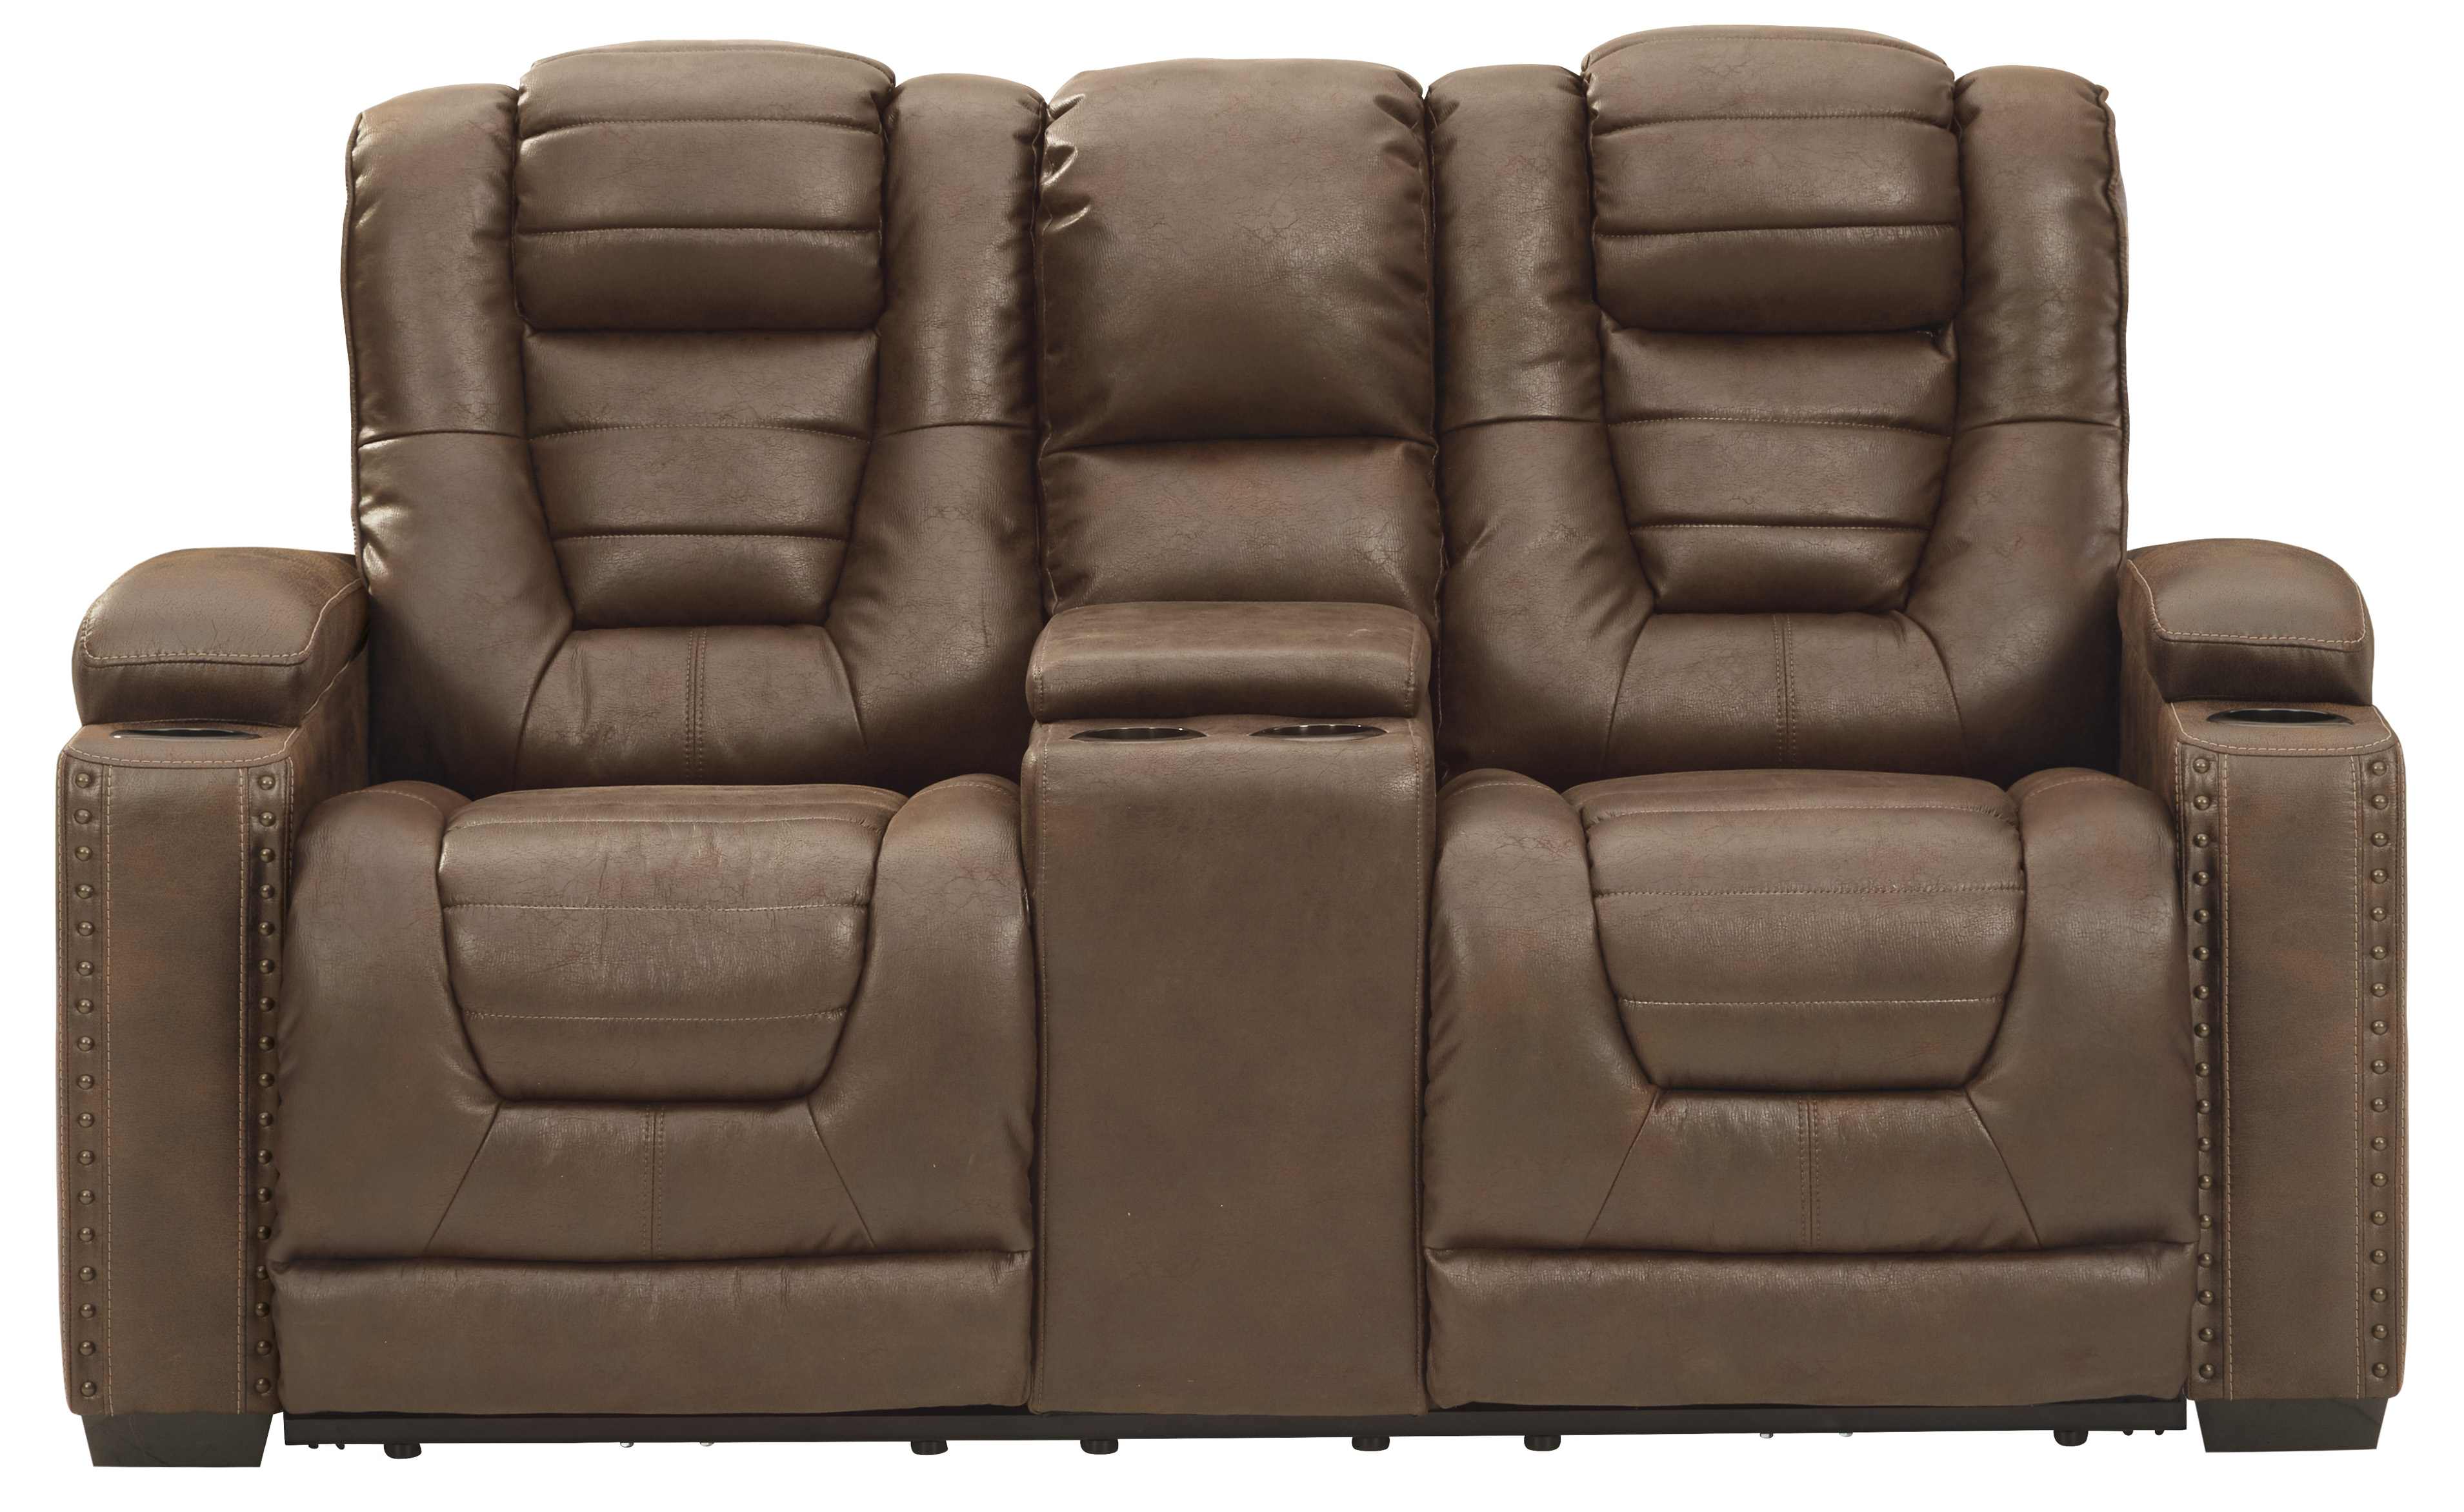 Signature Design by Ashley® Owner's Box Thyme Power Reclining Loveseat with Adjustable Headrest